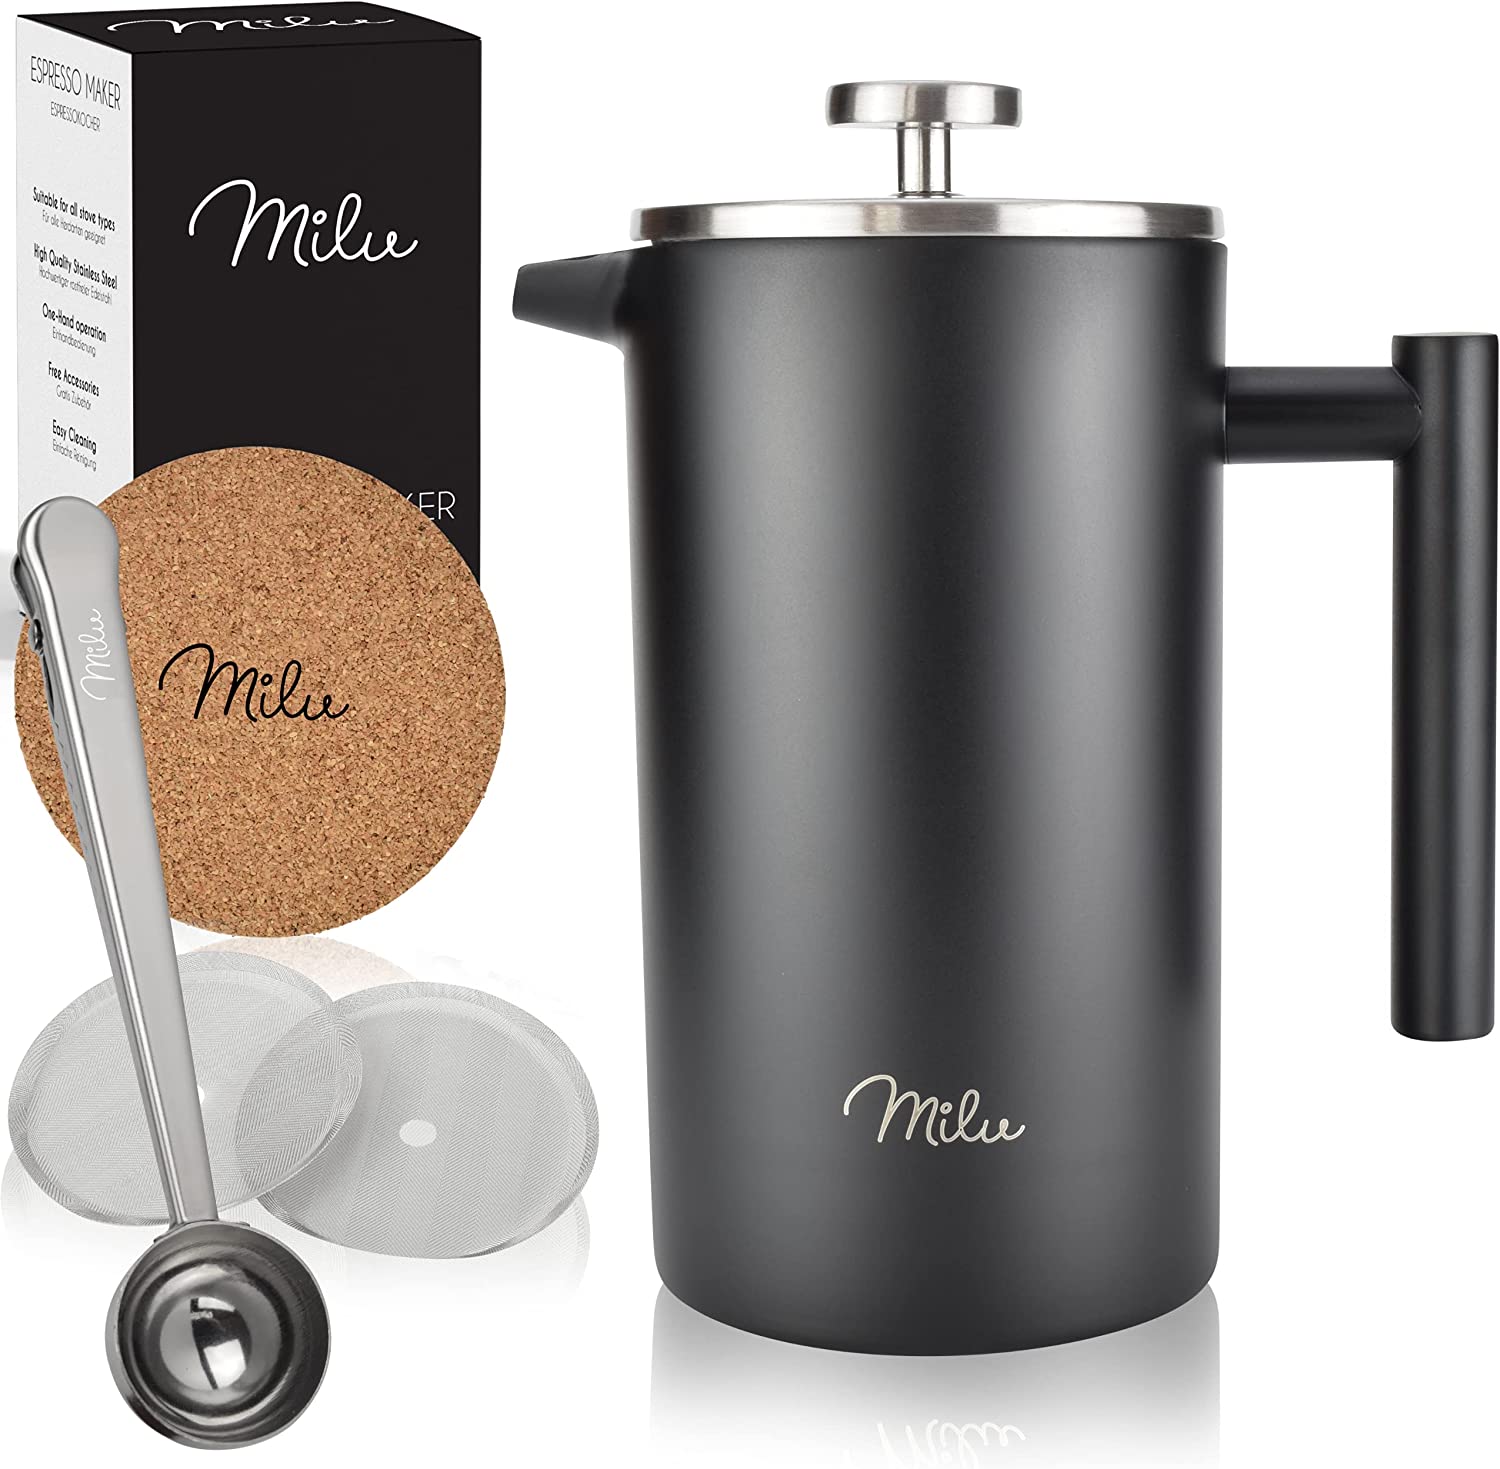 Milu French Press Coffee Maker | 350ml, 600ml, 1L | Stainless Steel Coffee Press Coffee Maker for Home Travel Camping Includes Coaster, Spoon, Replacement Filter (Black, 600ml (3 Cups)